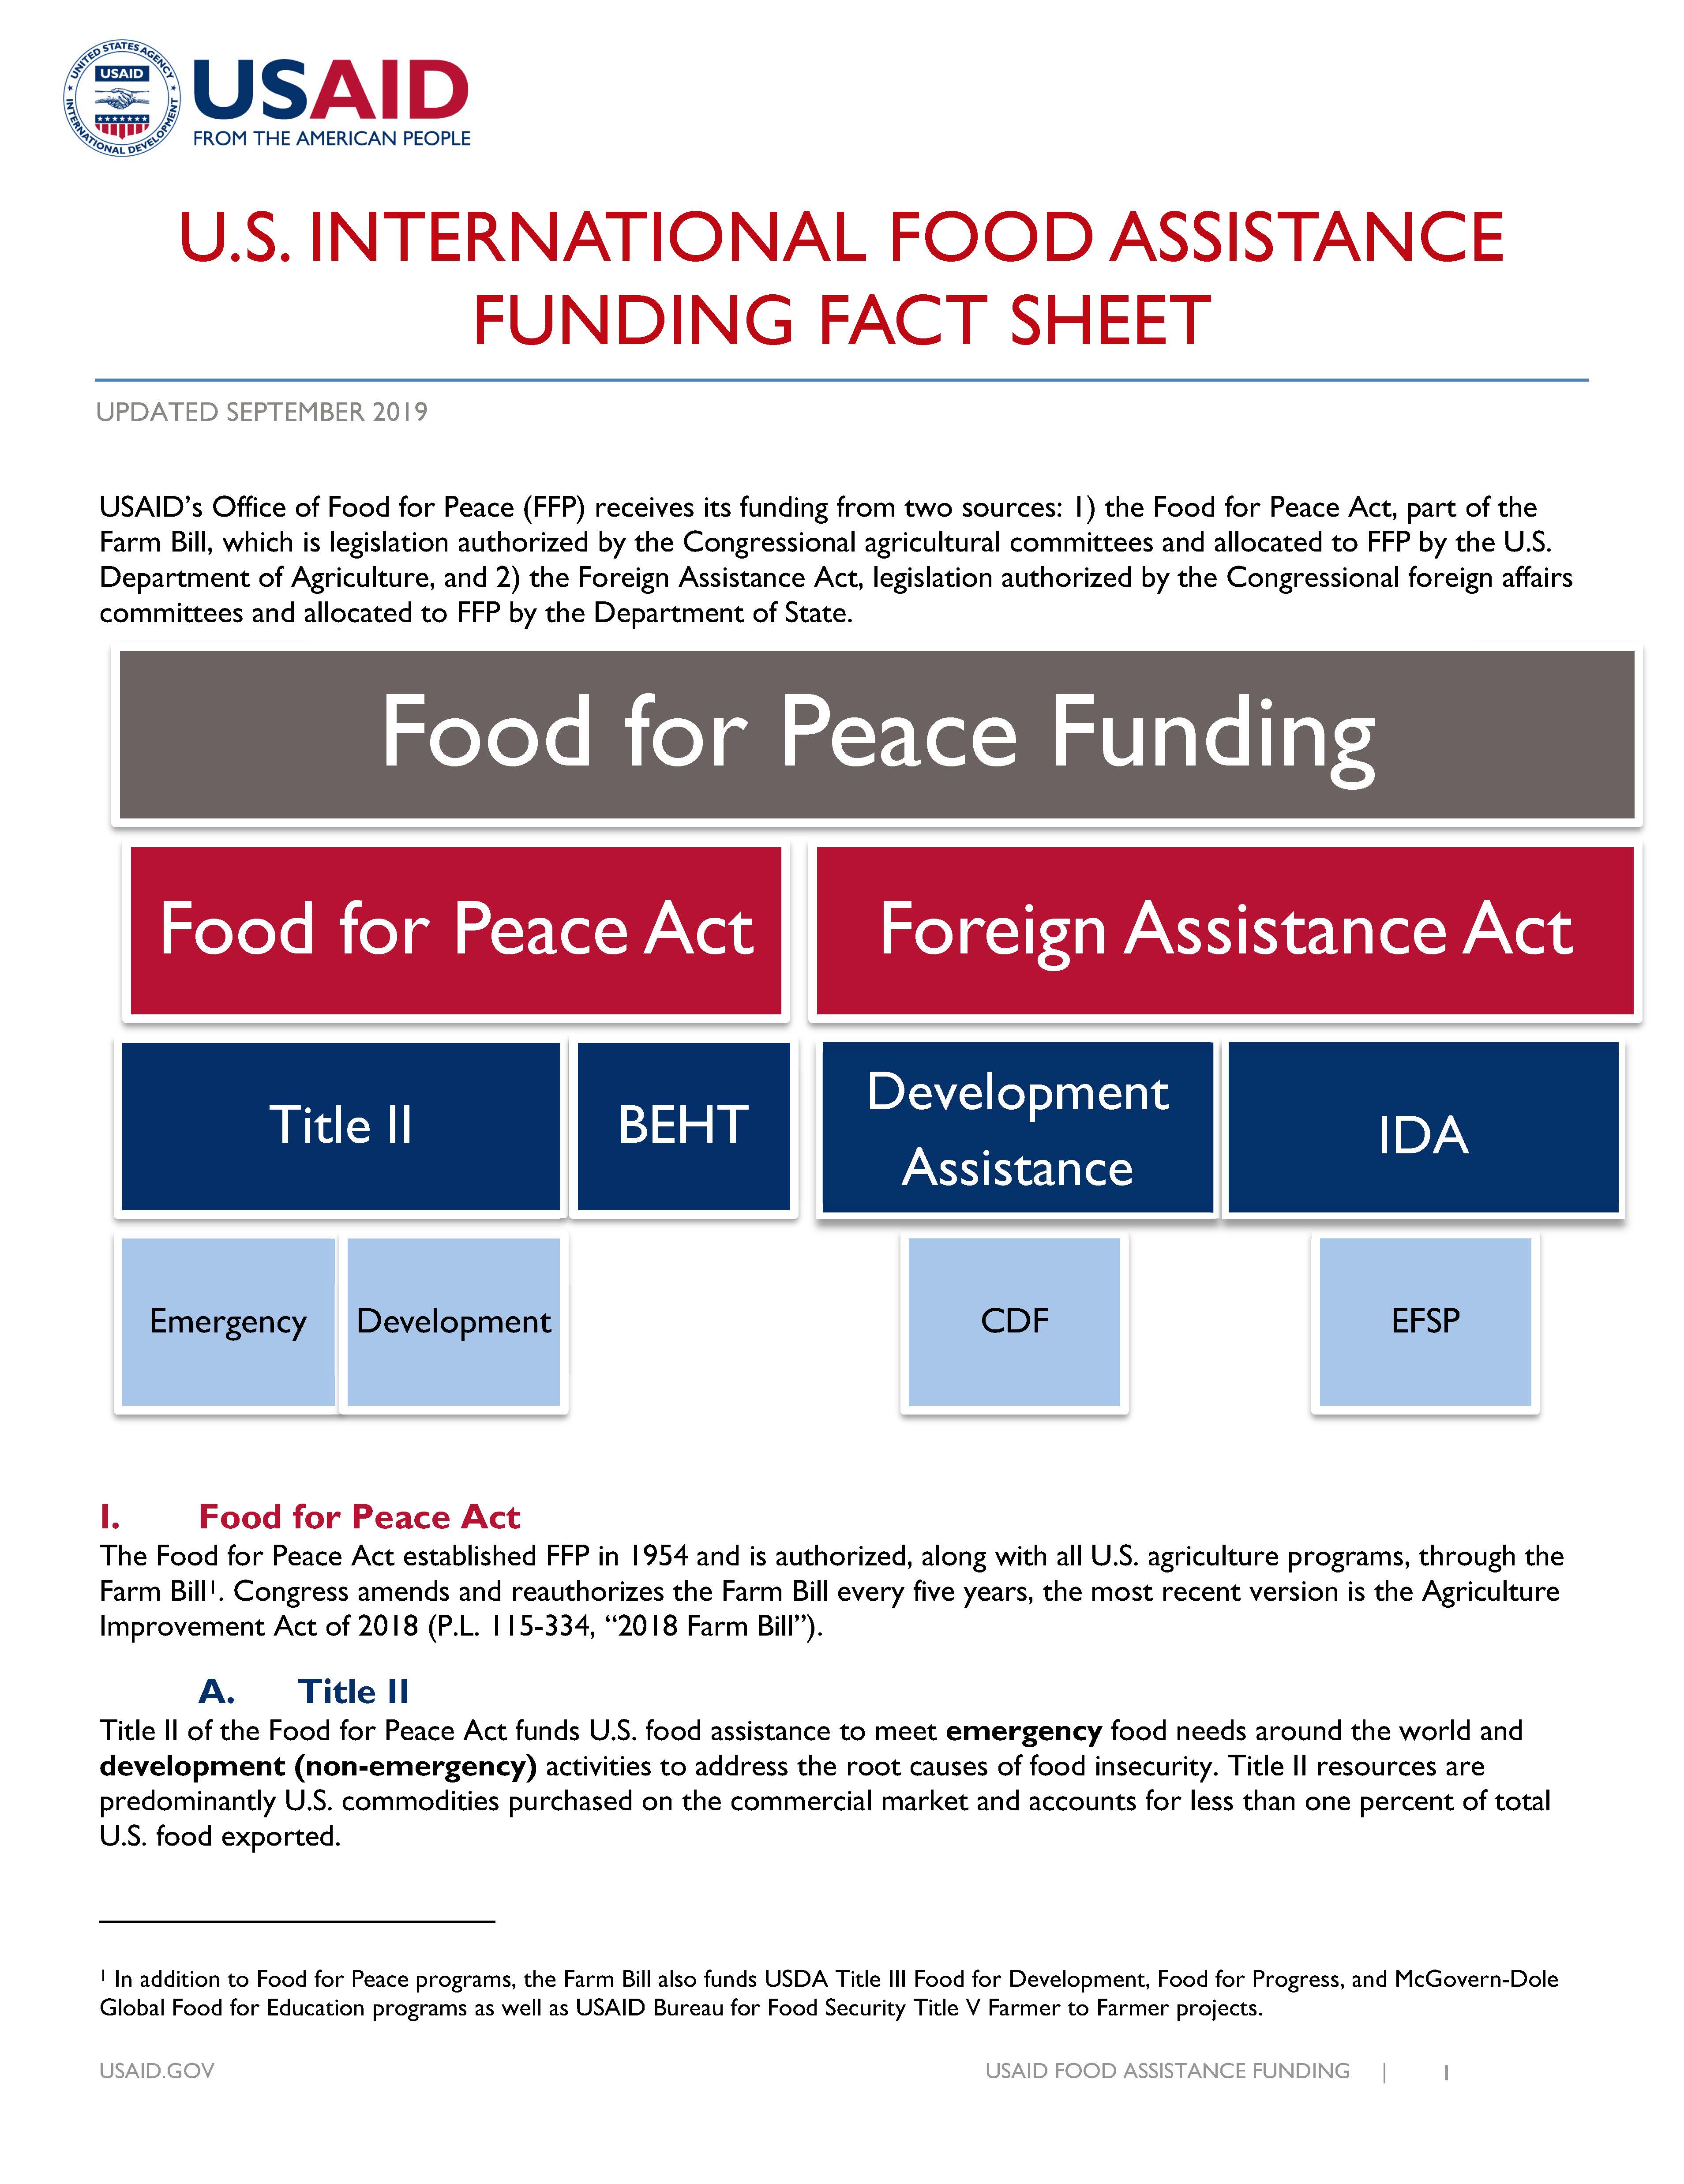 Food for Peace Funding Overview